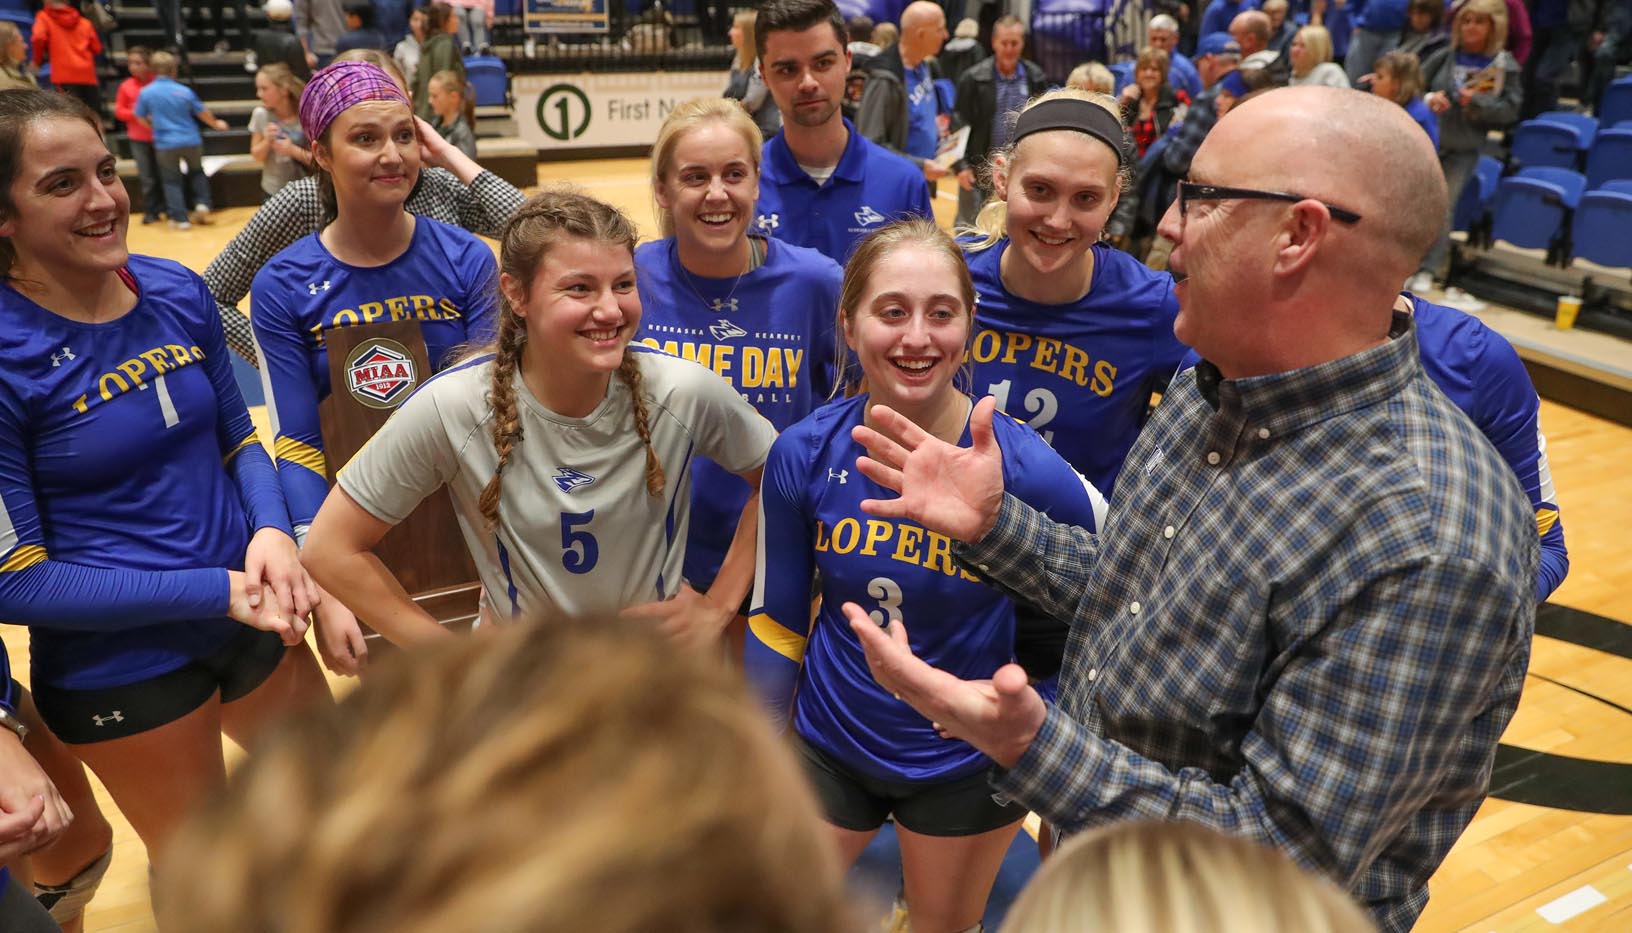 Inside UNK’s Health and Sports Center, Rick Squiers focuses on his role as head coach of the Loper volleyball team, which includes his daughters Anna, left, and Maddie, back middle. Away from campus, he switches to dad mode. (Photo by Corbey R. Dorsey, UNK Communications)